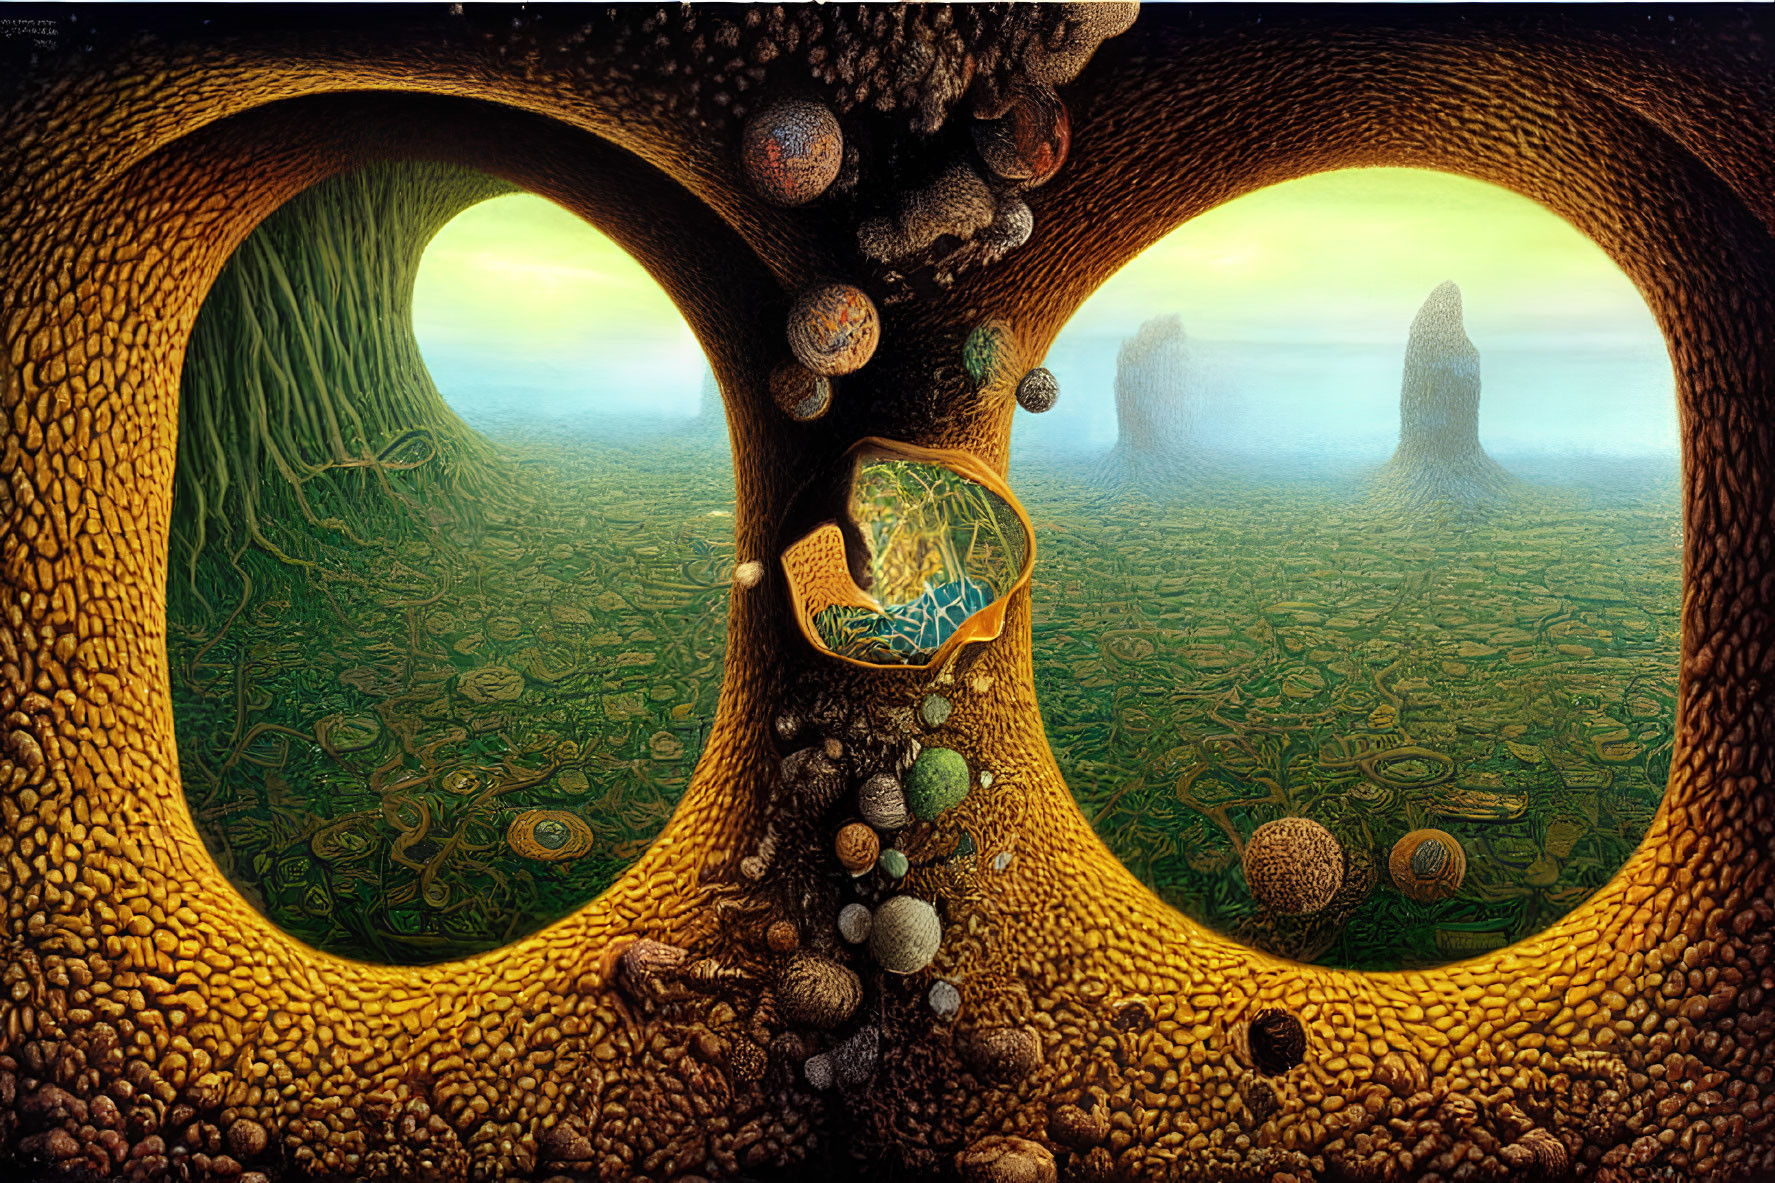 Surreal landscape featuring organic hollow structure and rock formations in distance amid verdant field.